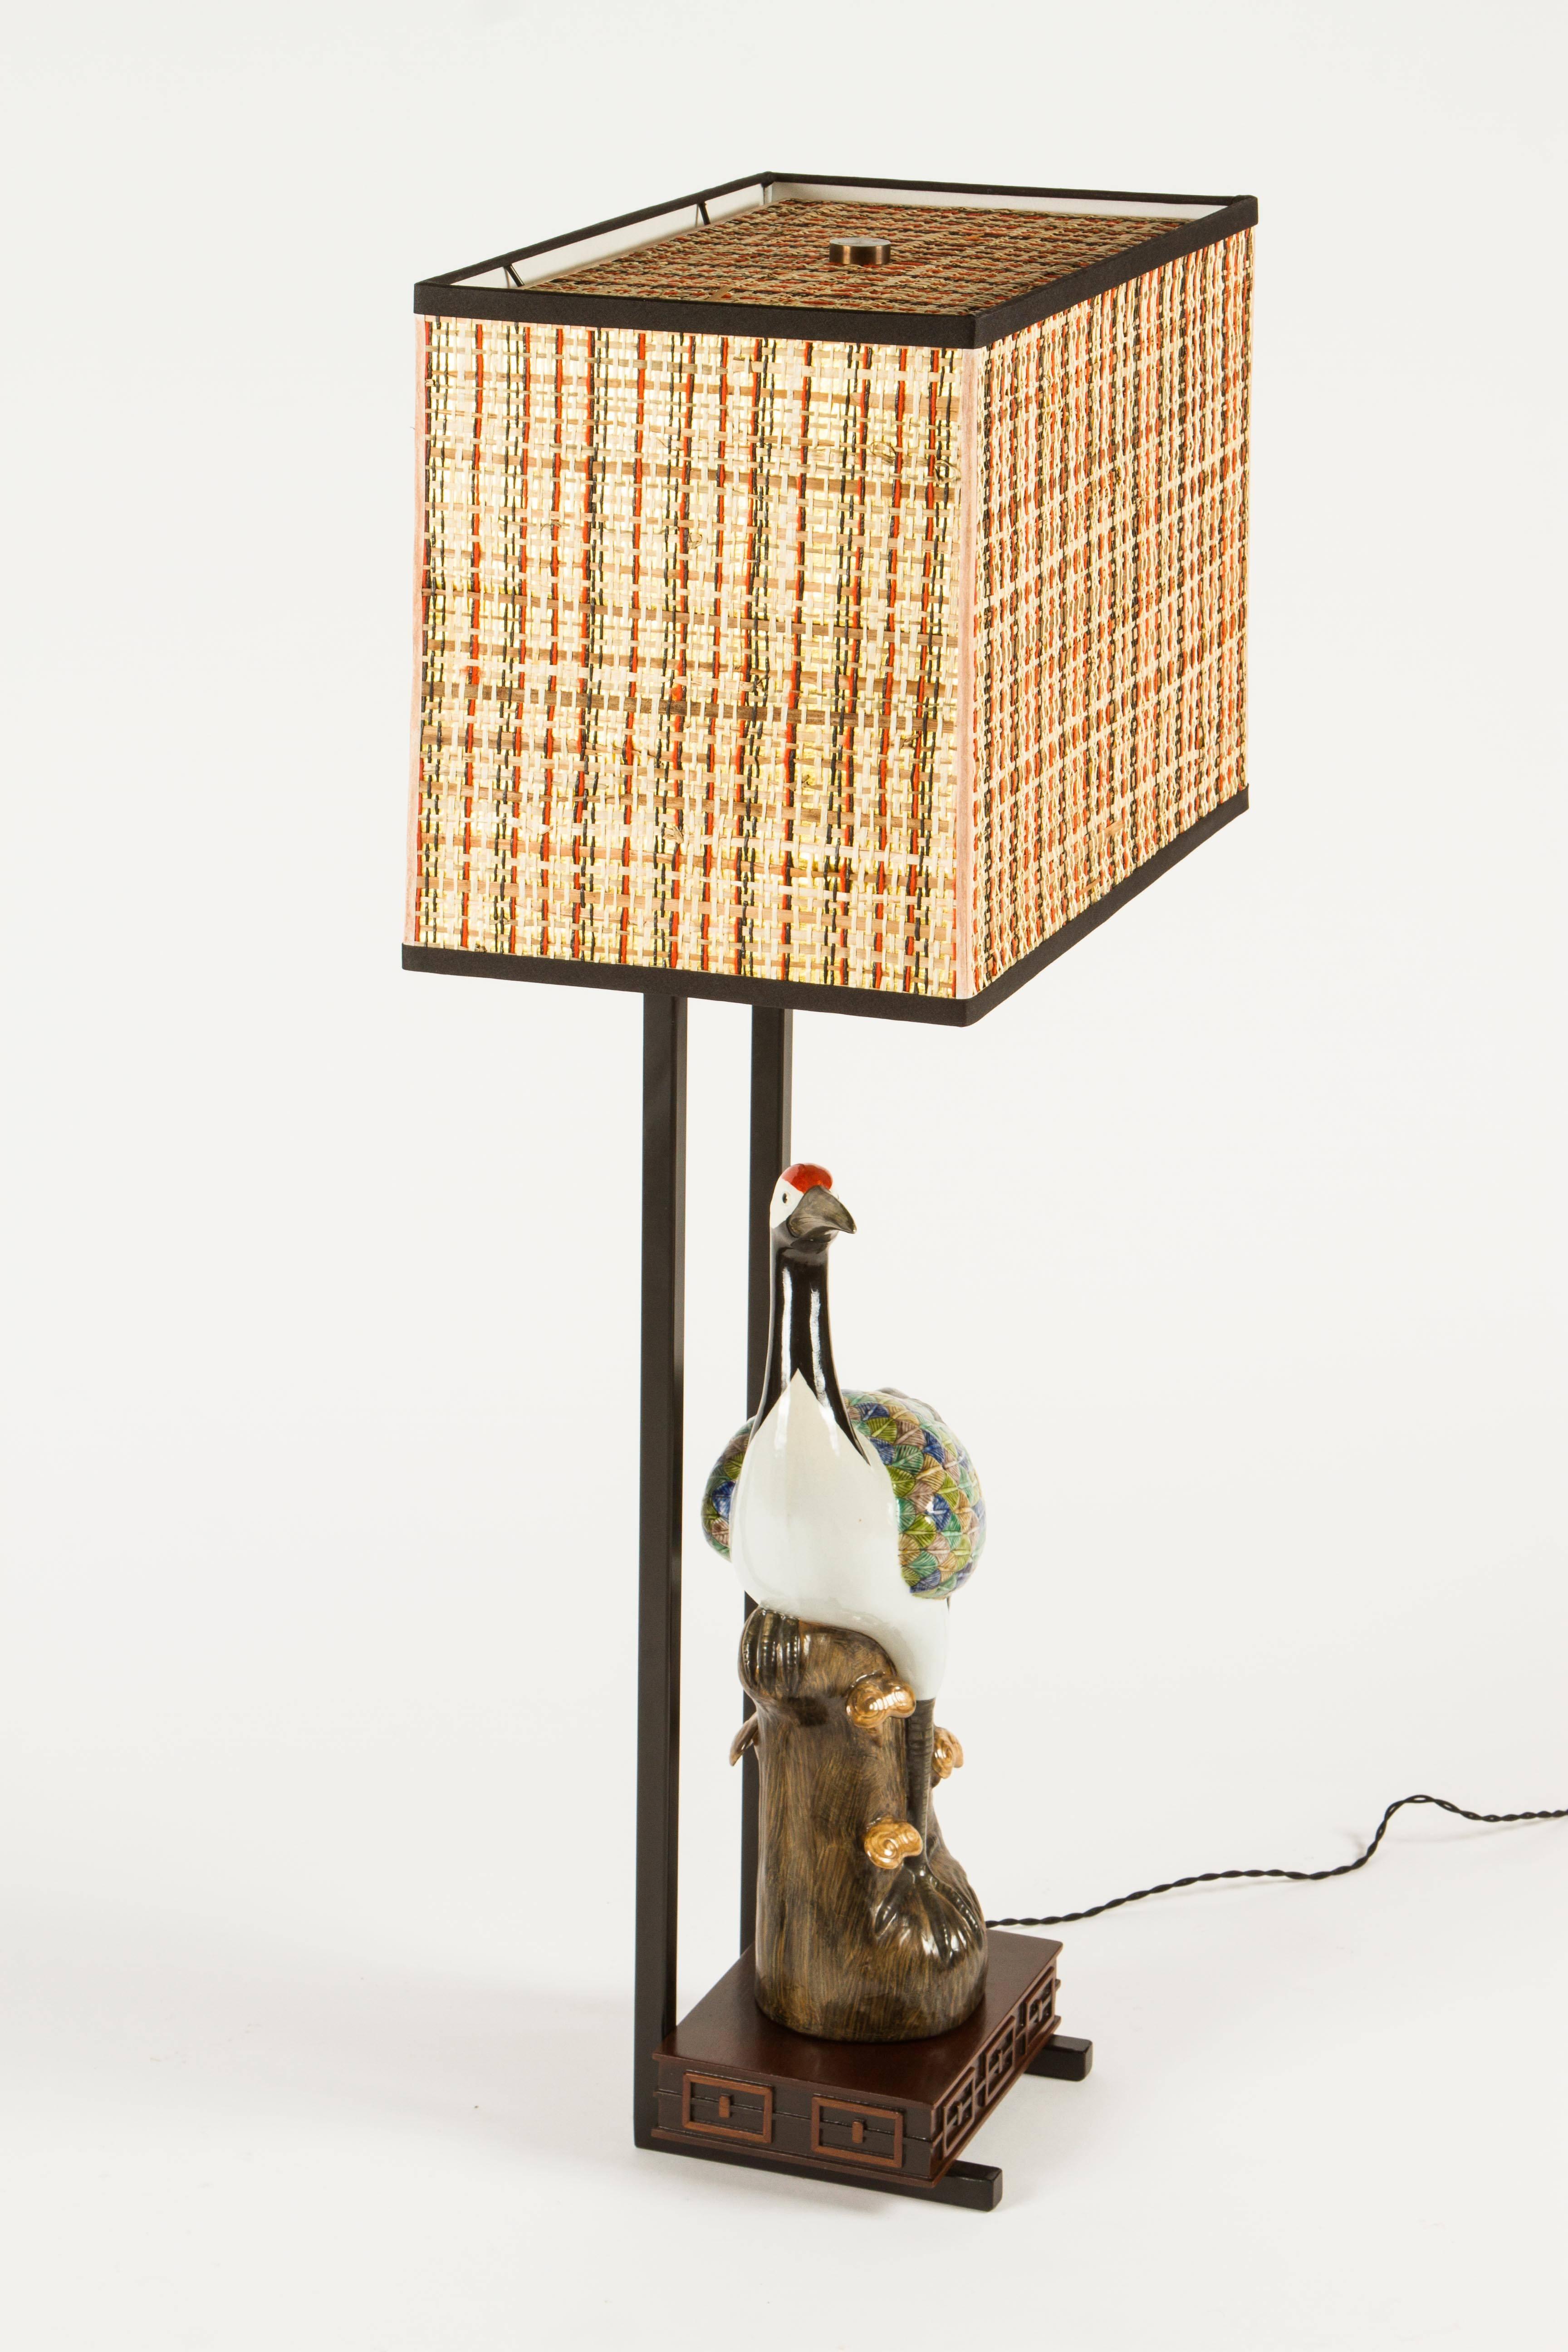 Wonderful armature table lamps by William Haines featuring Chinese ceramic egrets. The lamp is a highly polished dark brown walnut with a black metal armature. The egrets are not original to the lamp but quite often the figures have been replaced on